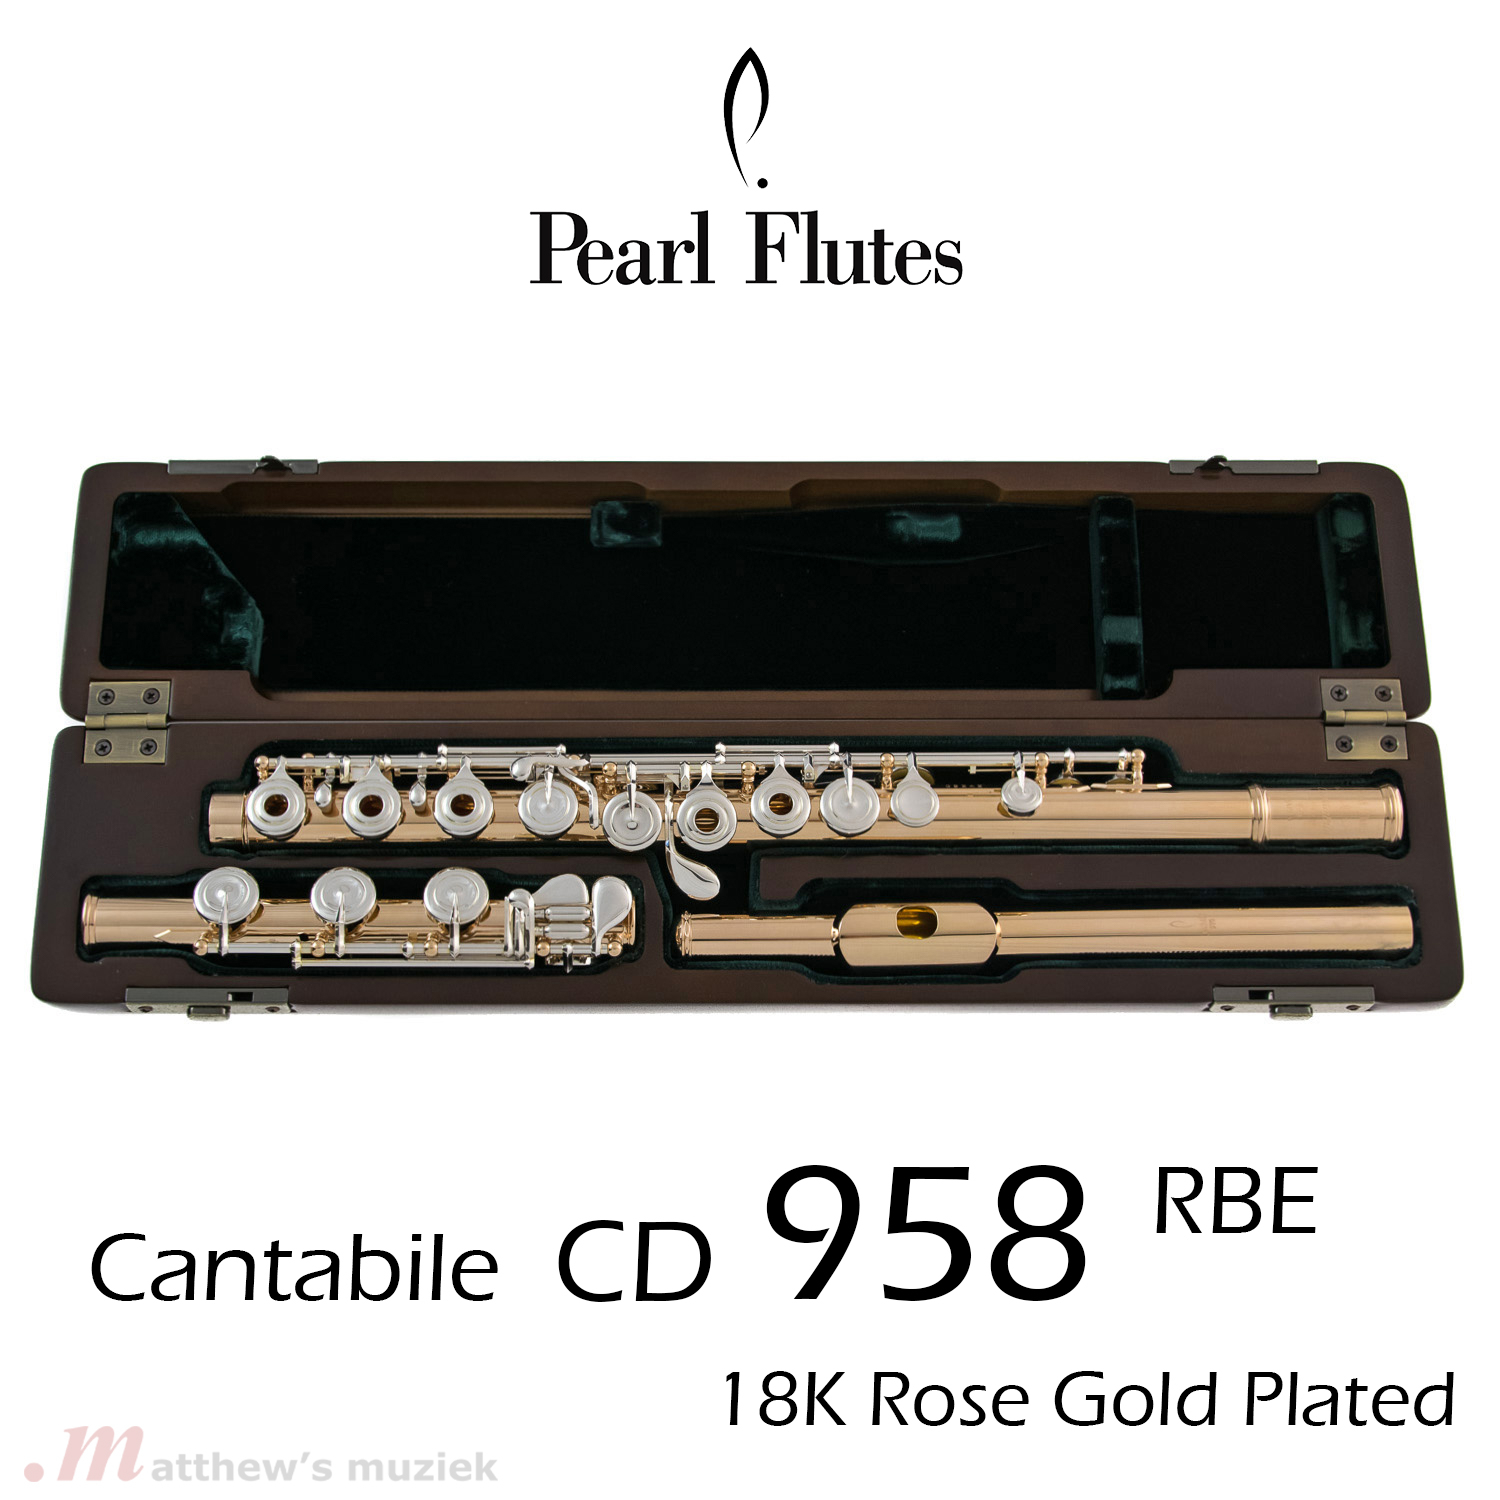 Pearl CD-958 RBE Cantabile Flute with 18K Gold